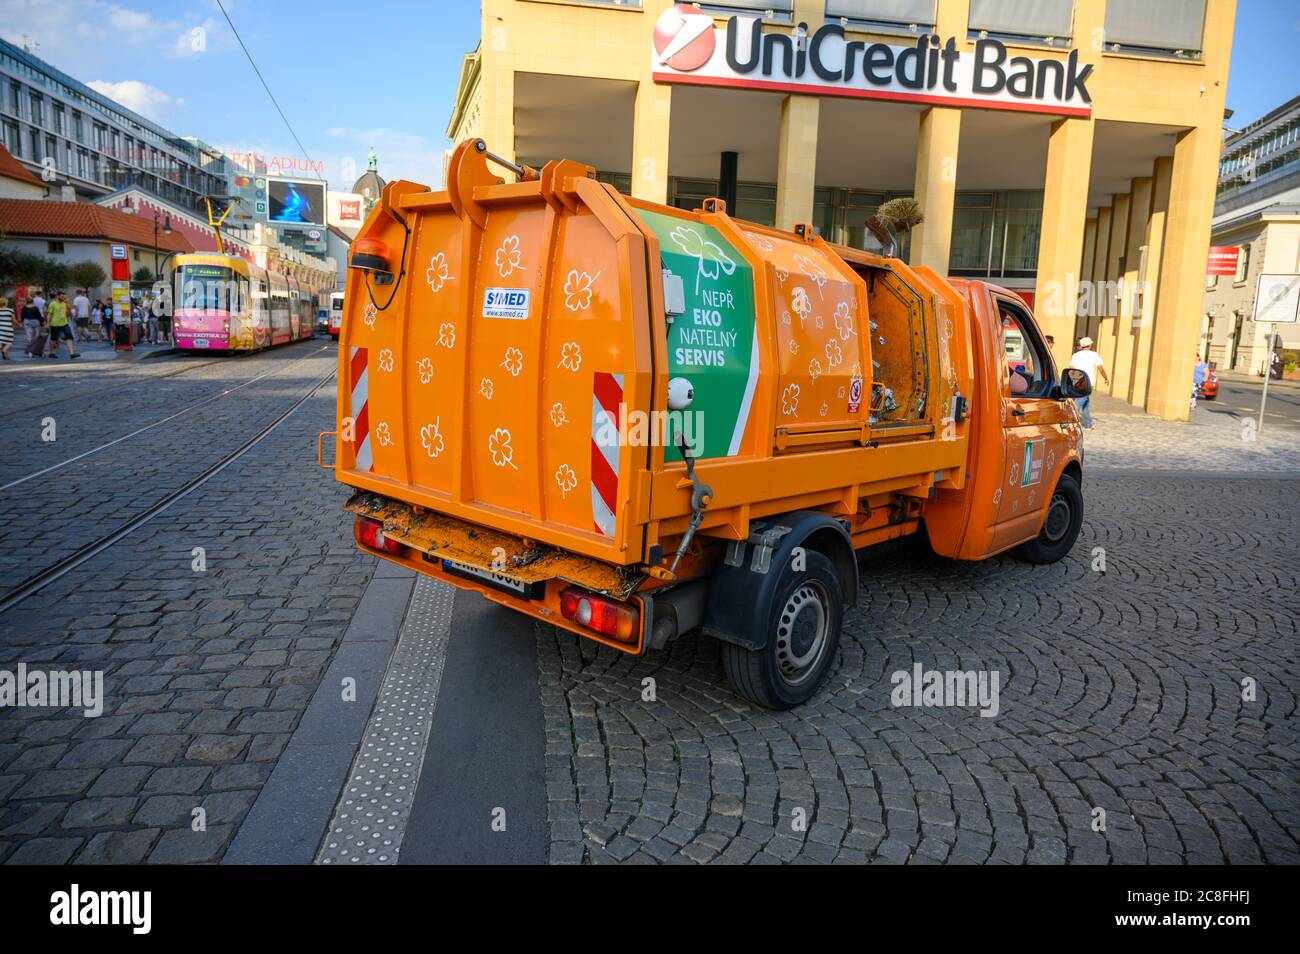 PRAGUE - JULY 20, 2019: Small orange garbage truck on the cobbled streets of the old town district of Prague Stock Photo